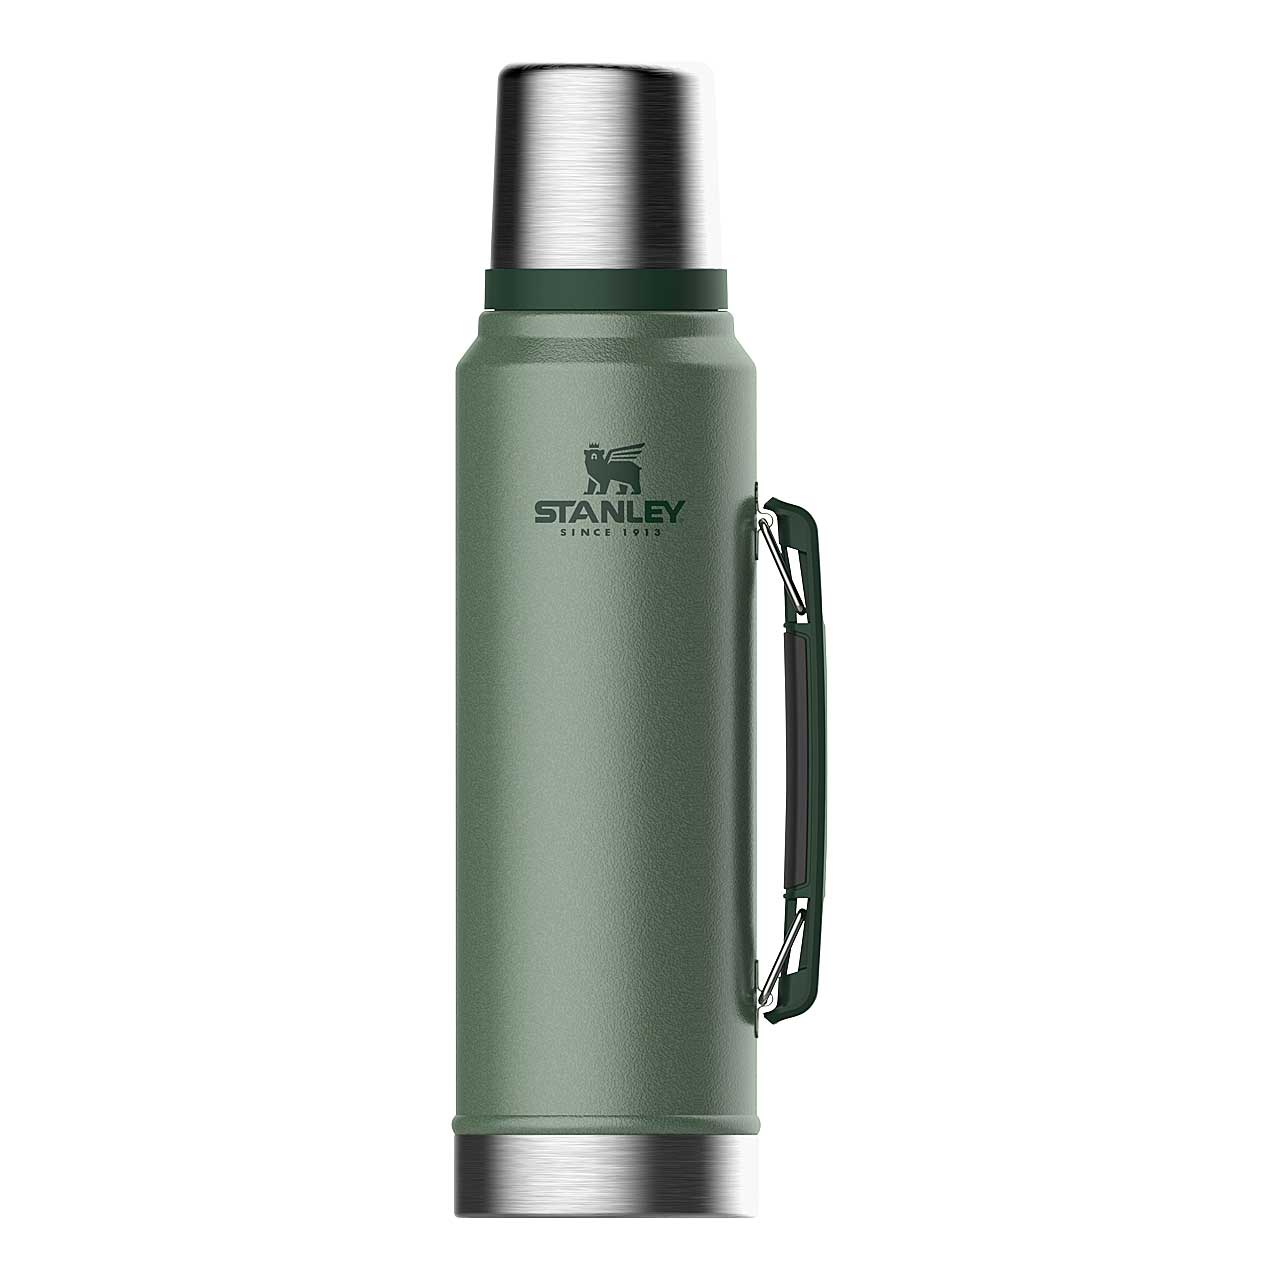 Picture of Stanley Classic Legendary Insulated Bottle - 1.0 liter - Hammertone Green